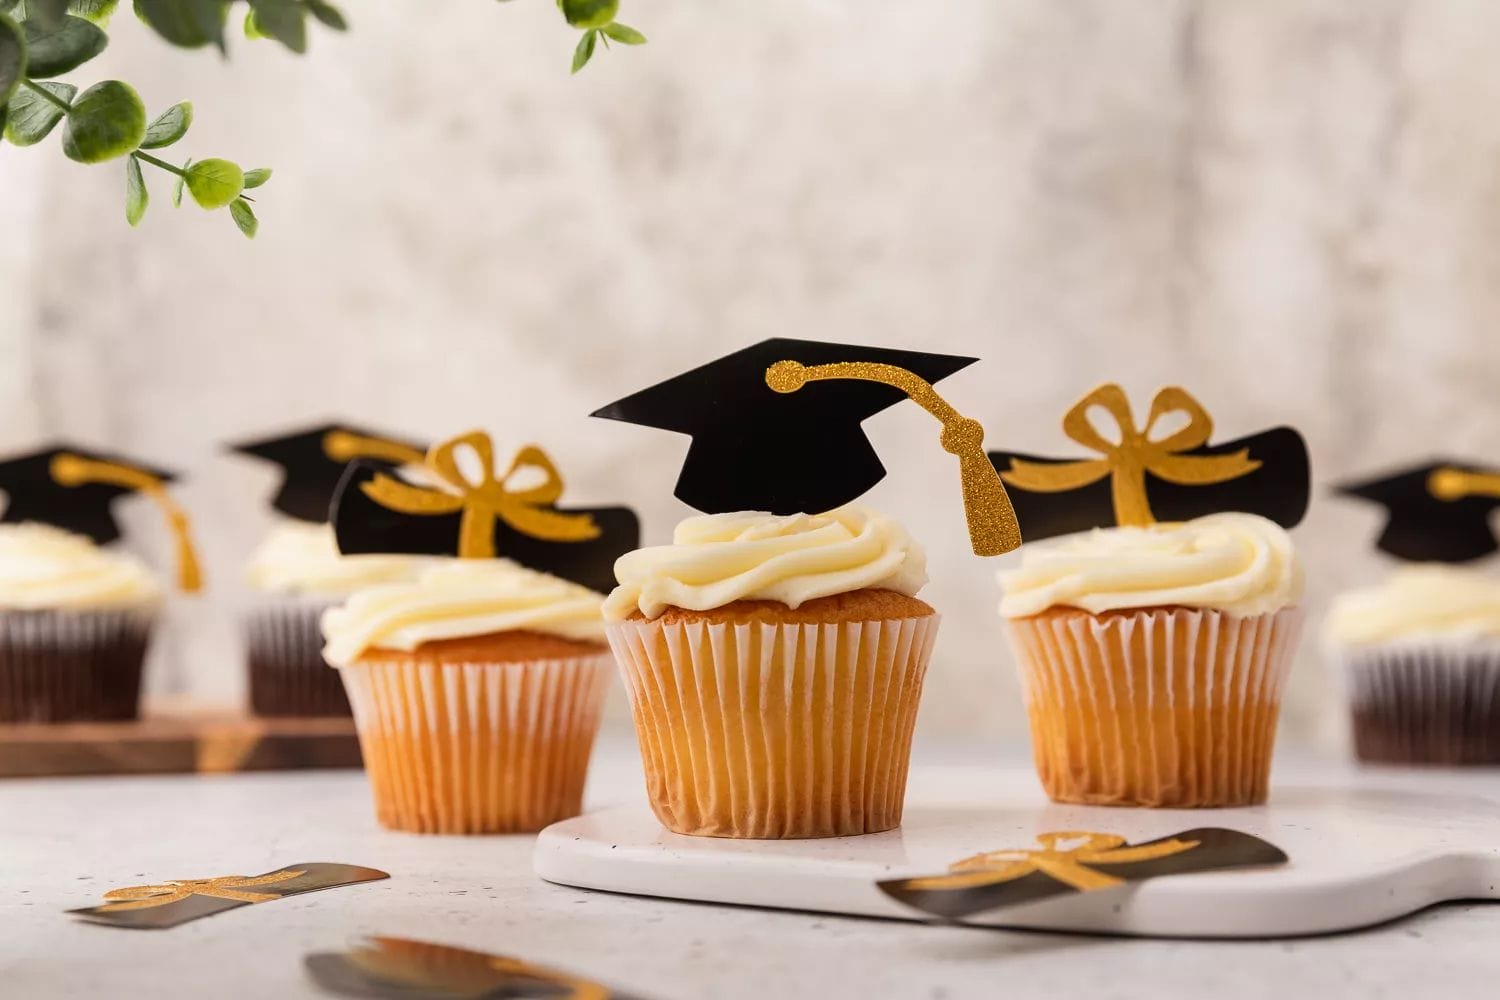 Cupcakes with white icing topped with graduation party